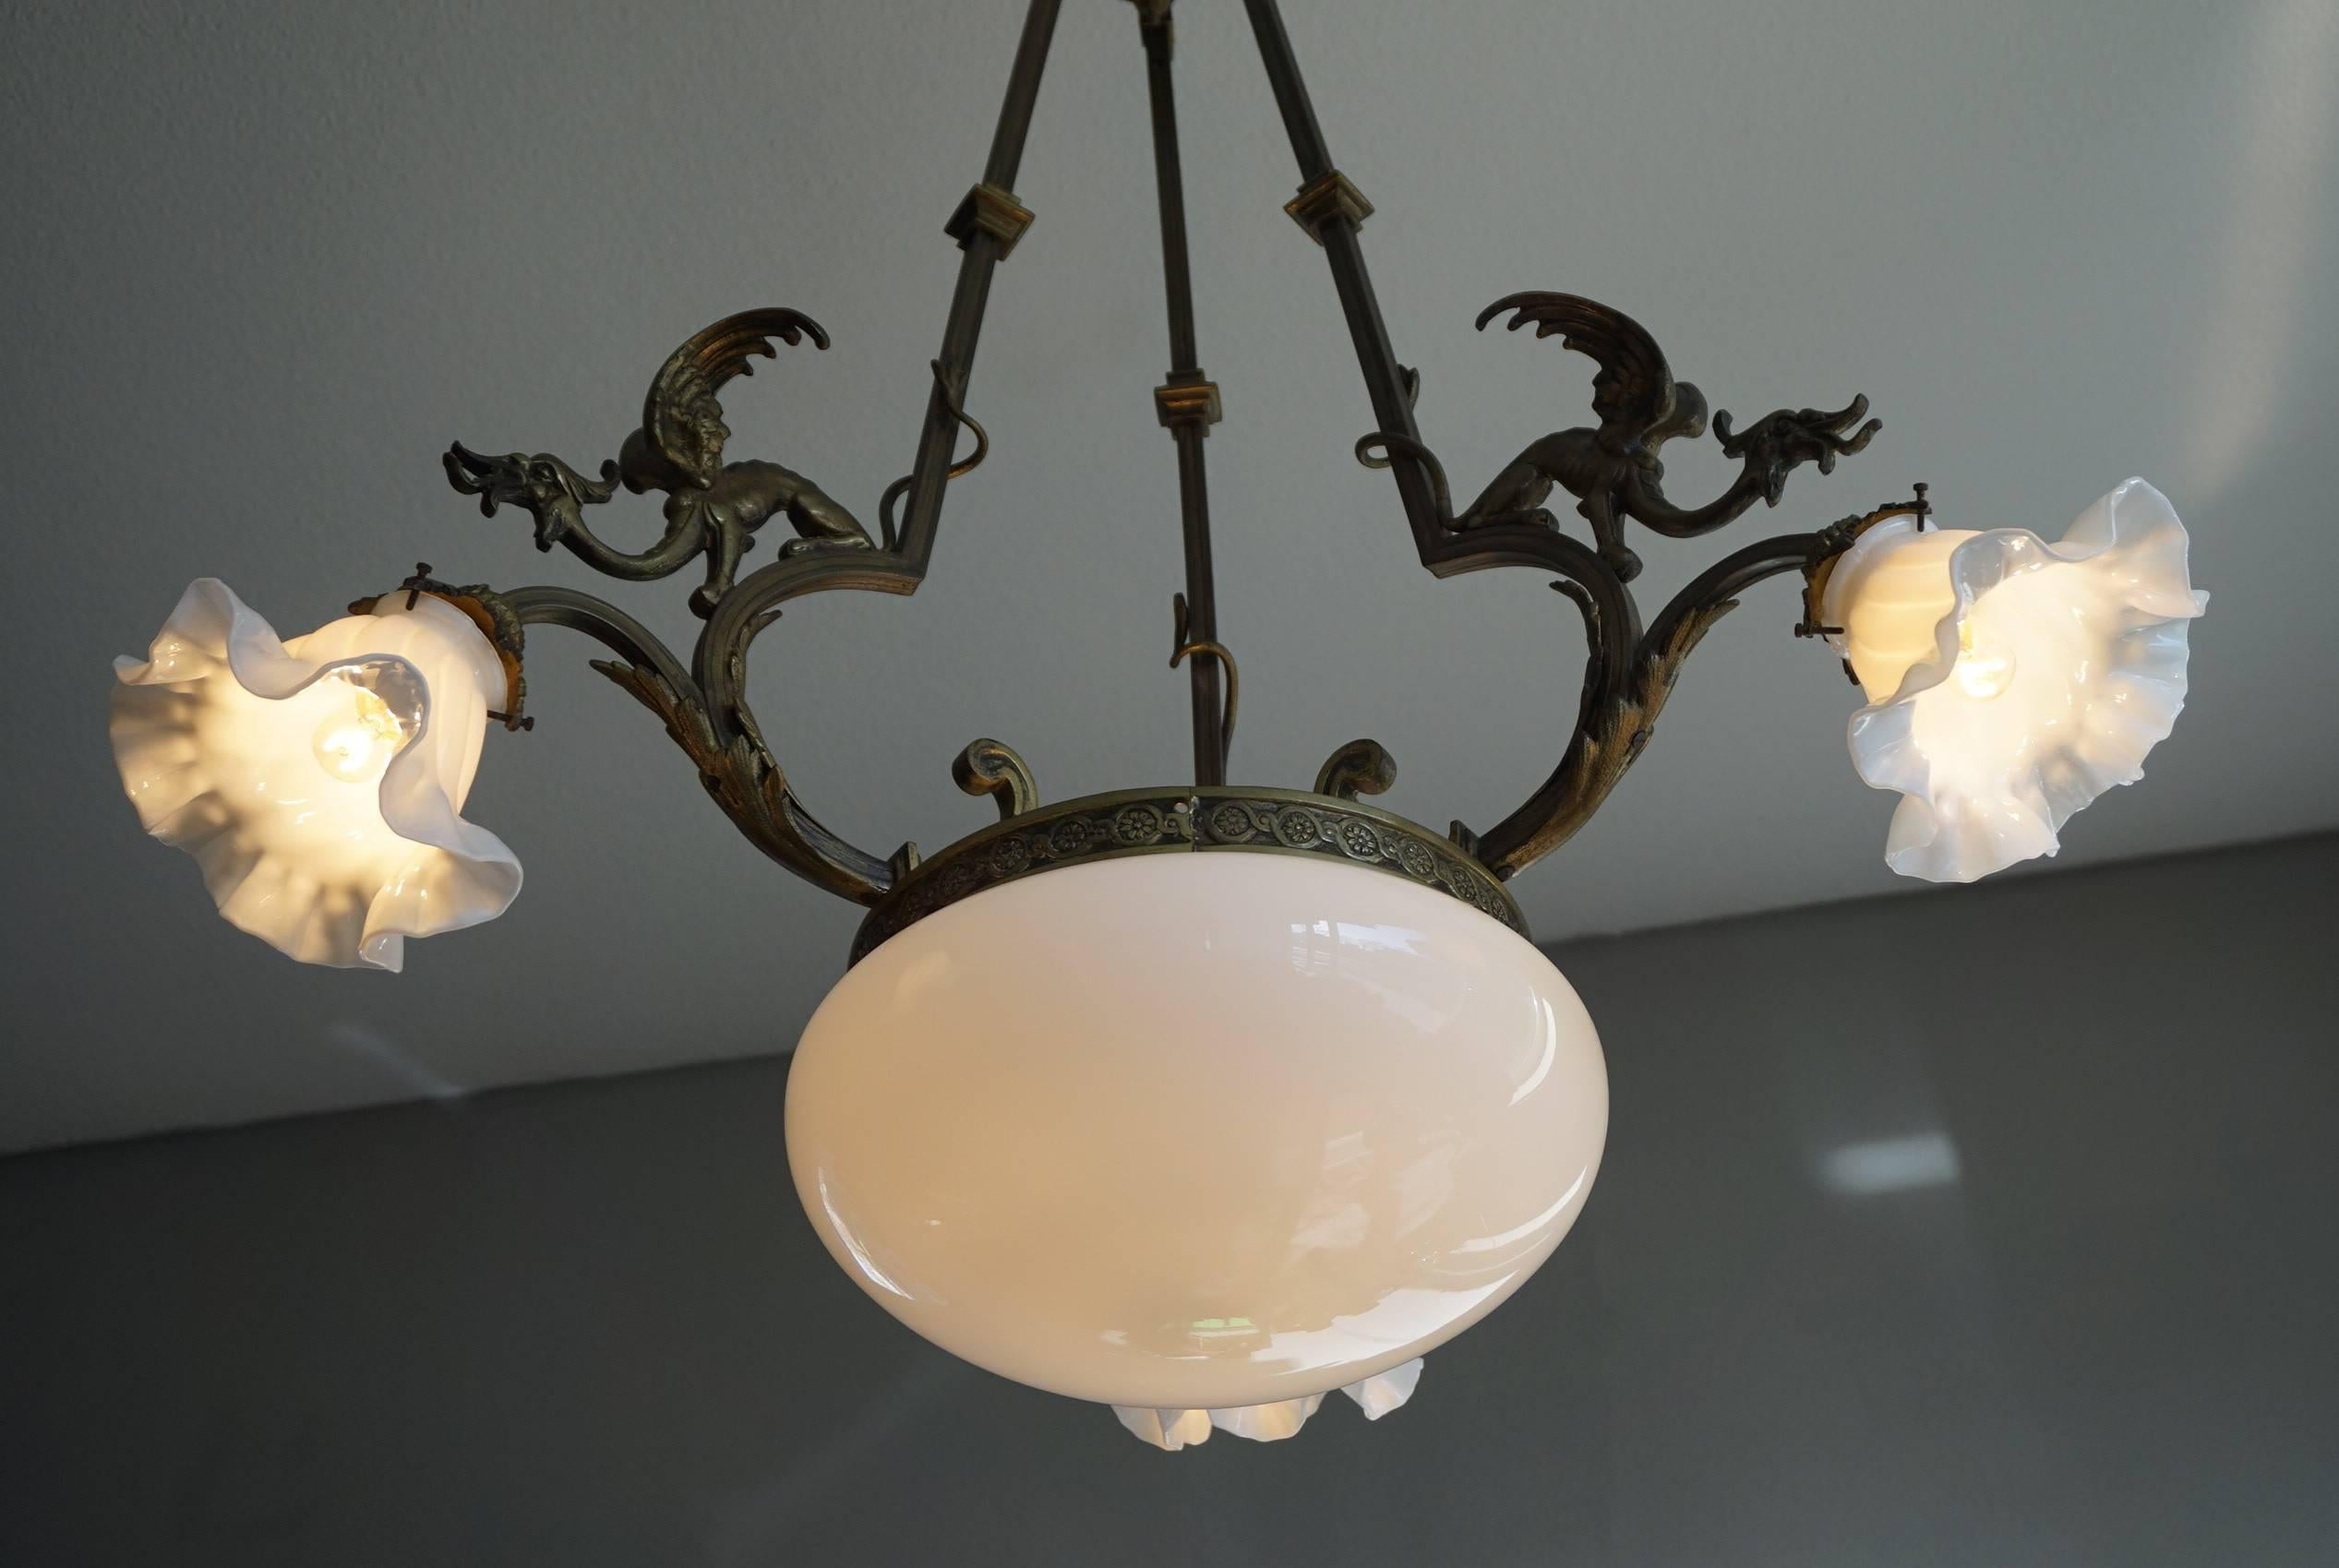 French Antique Gothic Revival Bronze & Glass Pendant / Chandelier w. Winged Gargoyles For Sale